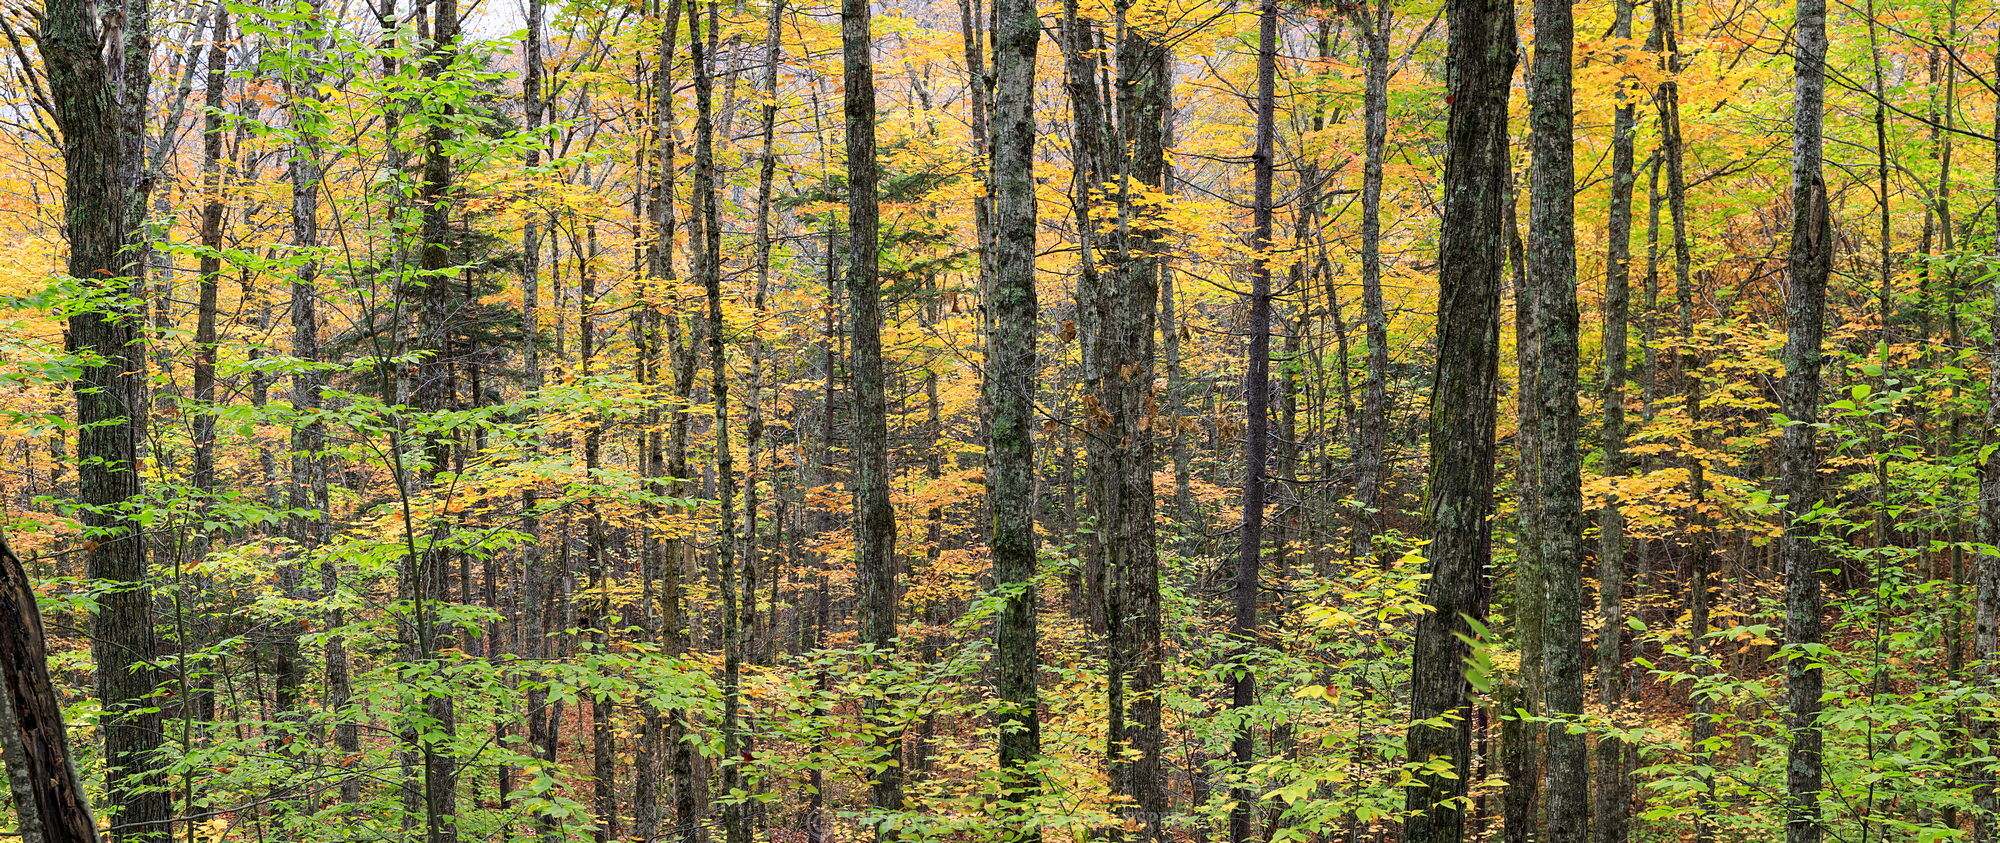 Gulf Brook Road,Boreas Ponds,forest,panorama,forest panorama,fall,maples,maple forest